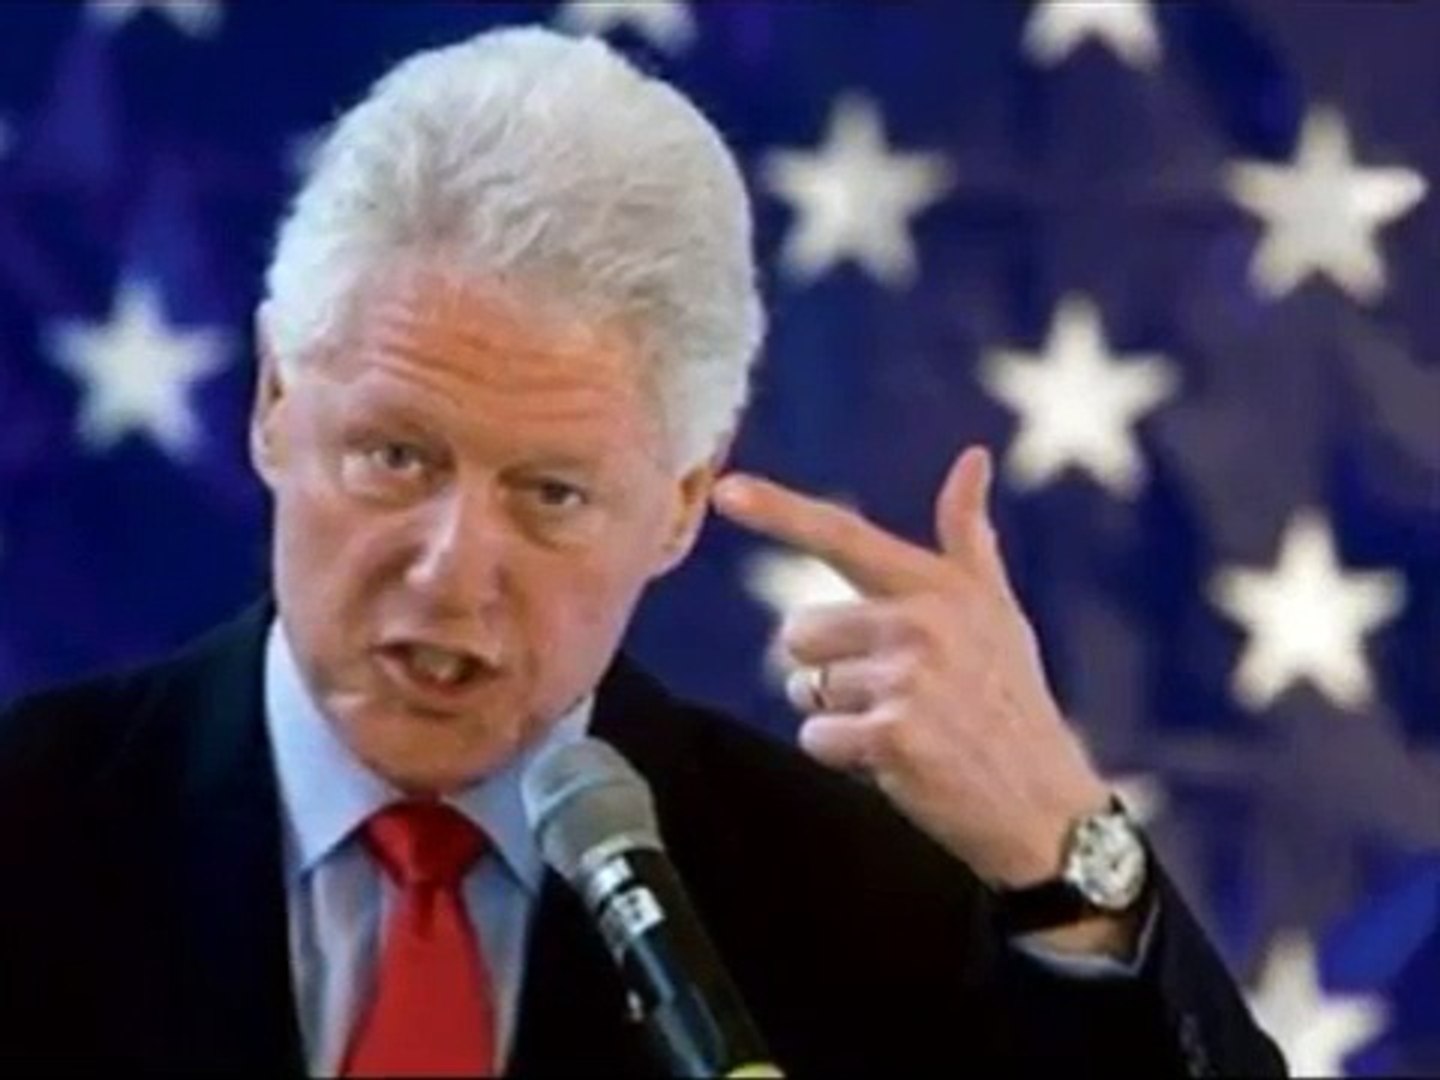 BREAKING NEWS TODAY, BREAKING NEWS About Bill Clinton, USA LATEST NEWS TODAY 11_21_17-2C2Y72wKCfc